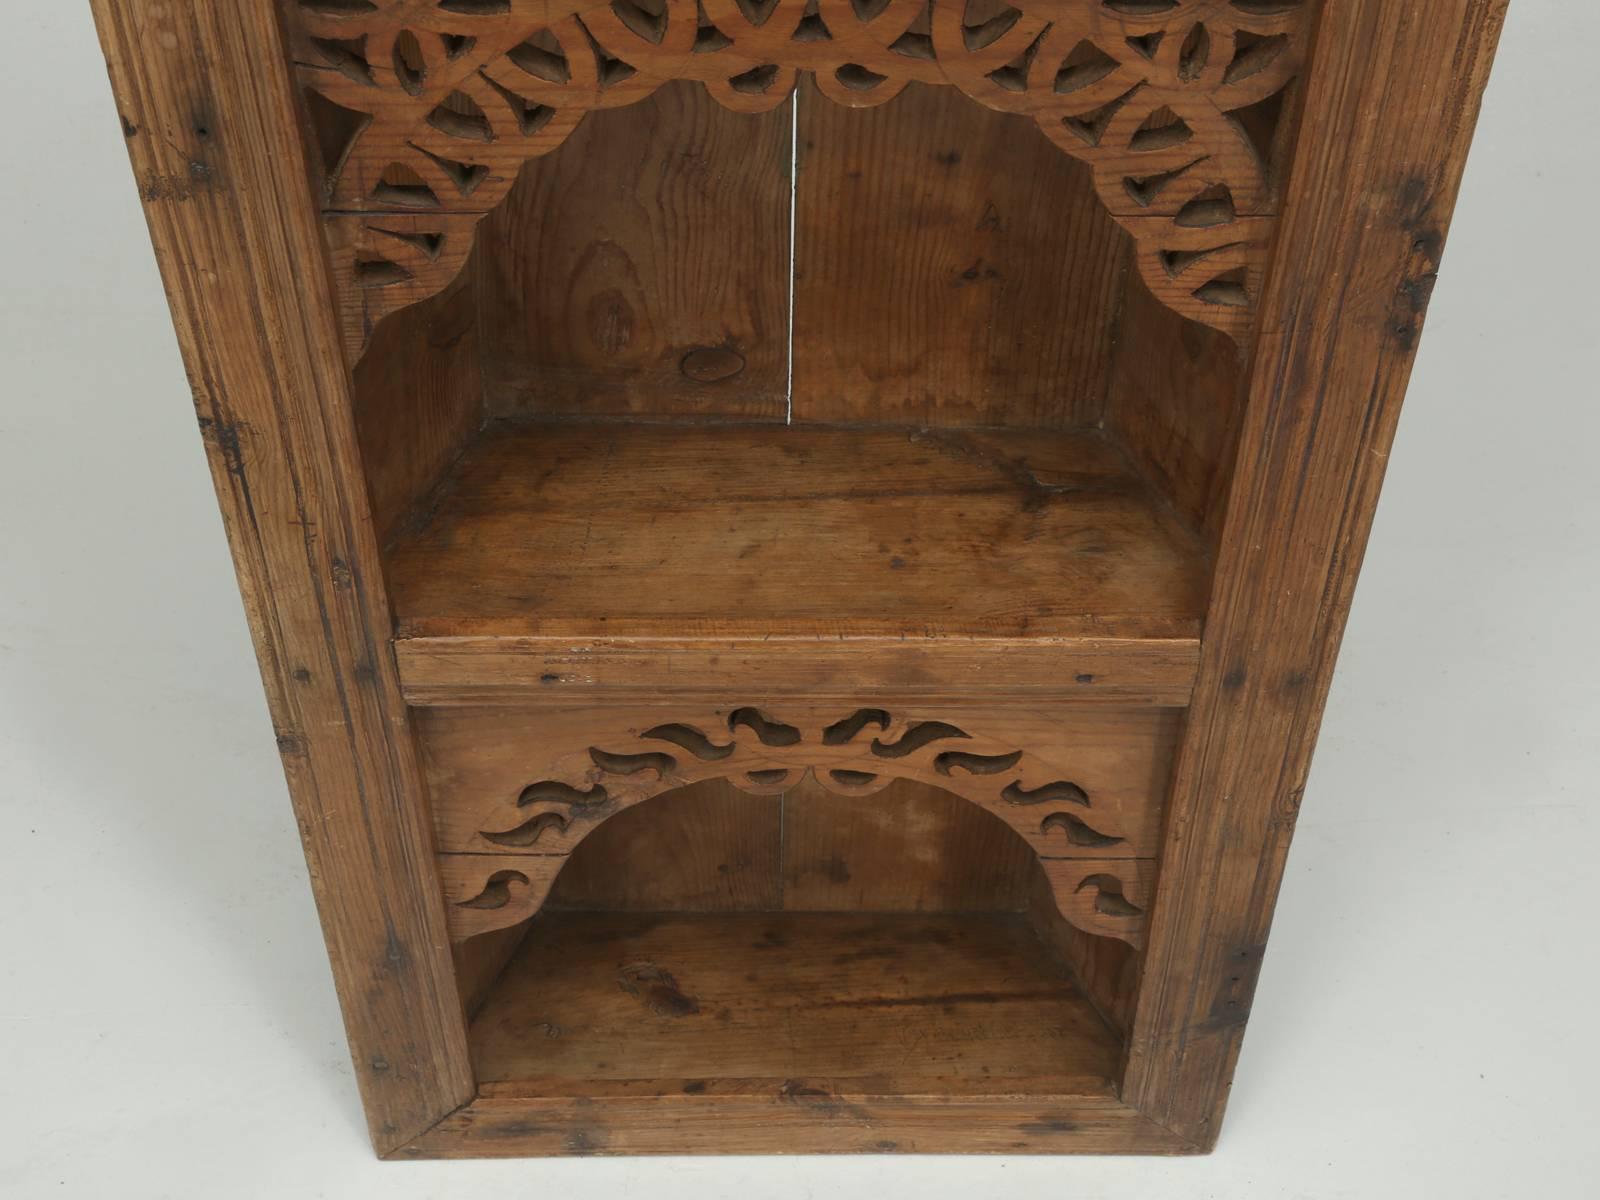 Late 19th Century Antique Pine Hanging Shelf Unit, or Open Cupboard